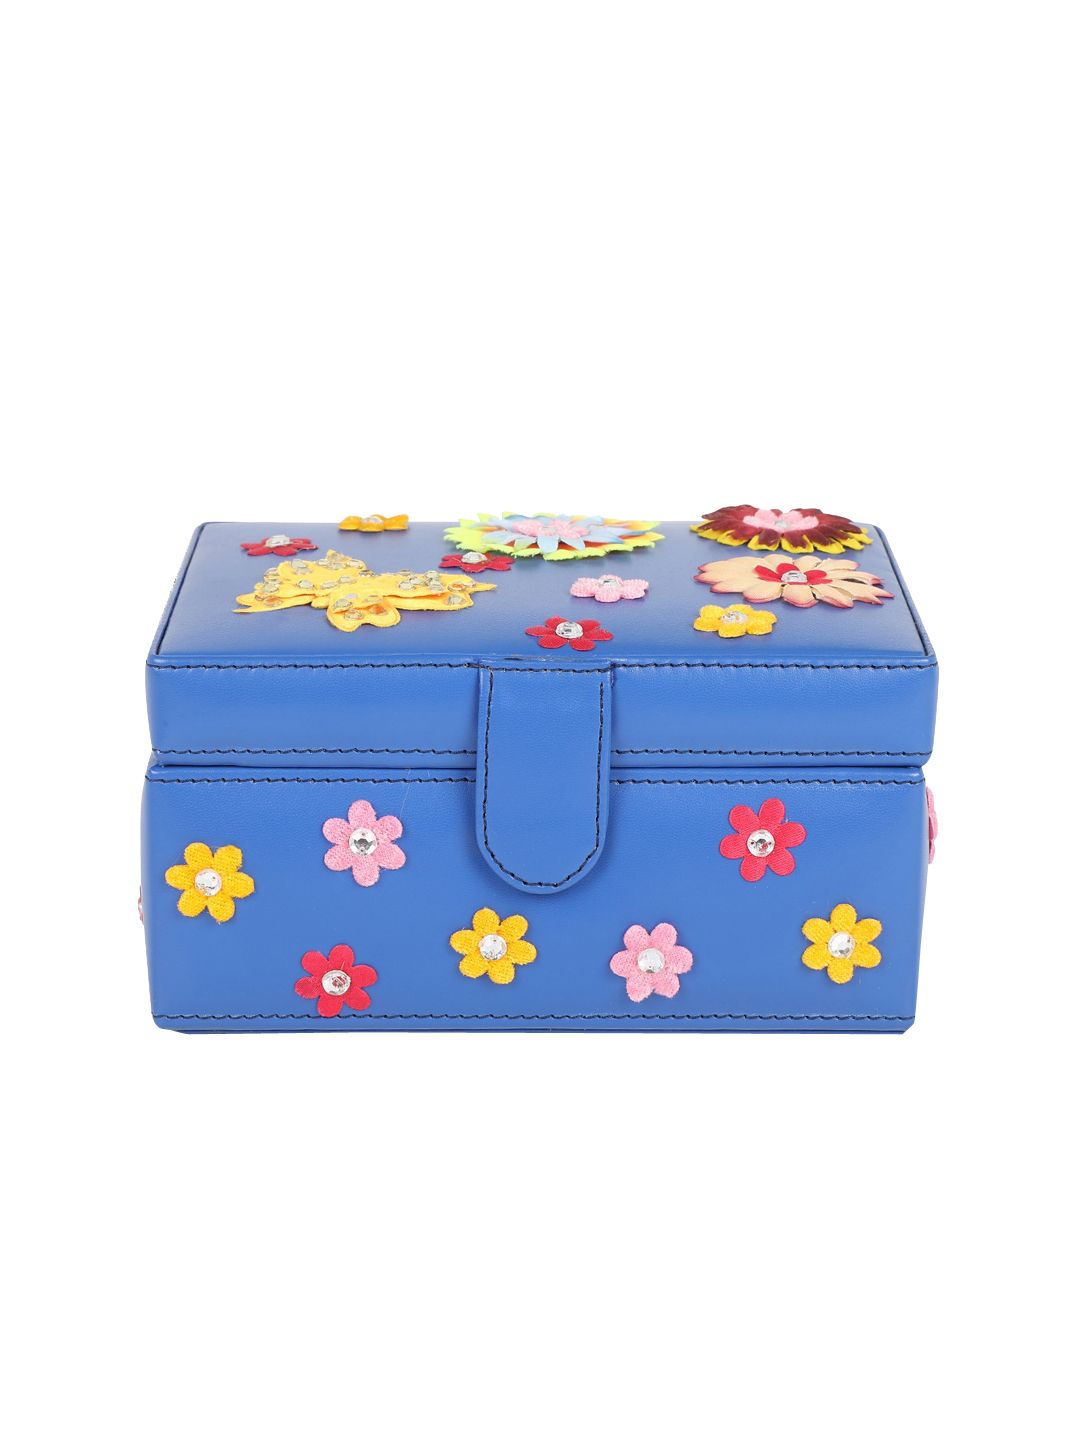 Vdesi Blue & Yellow Floral Embellished Jewellery Box Organiser Price in India